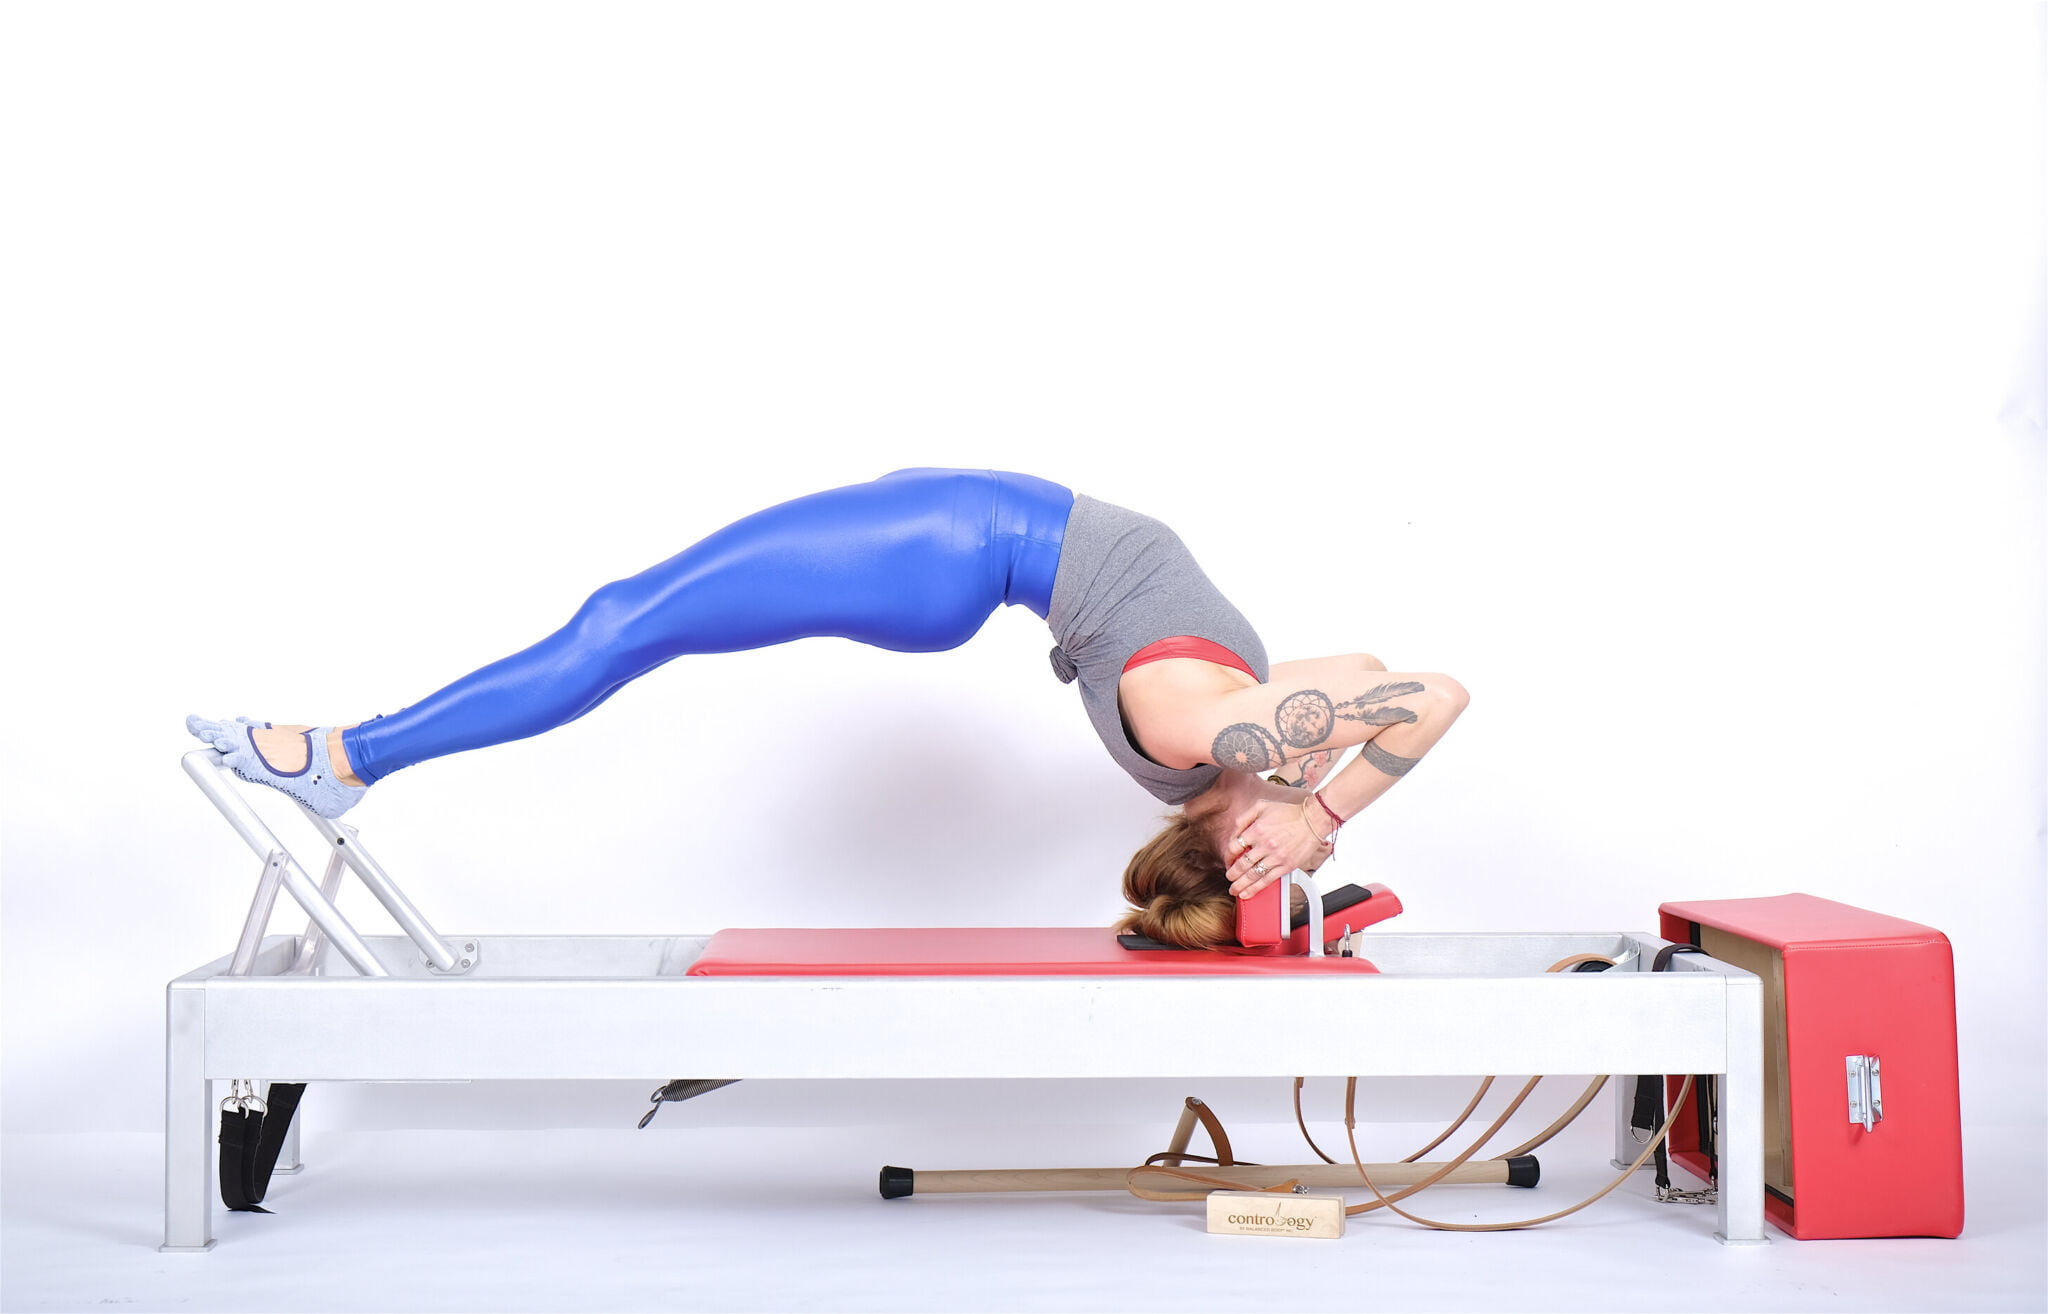 Headstand-Facing-Up-on-the-Reformer-Online-Pilates-Classes-scaled